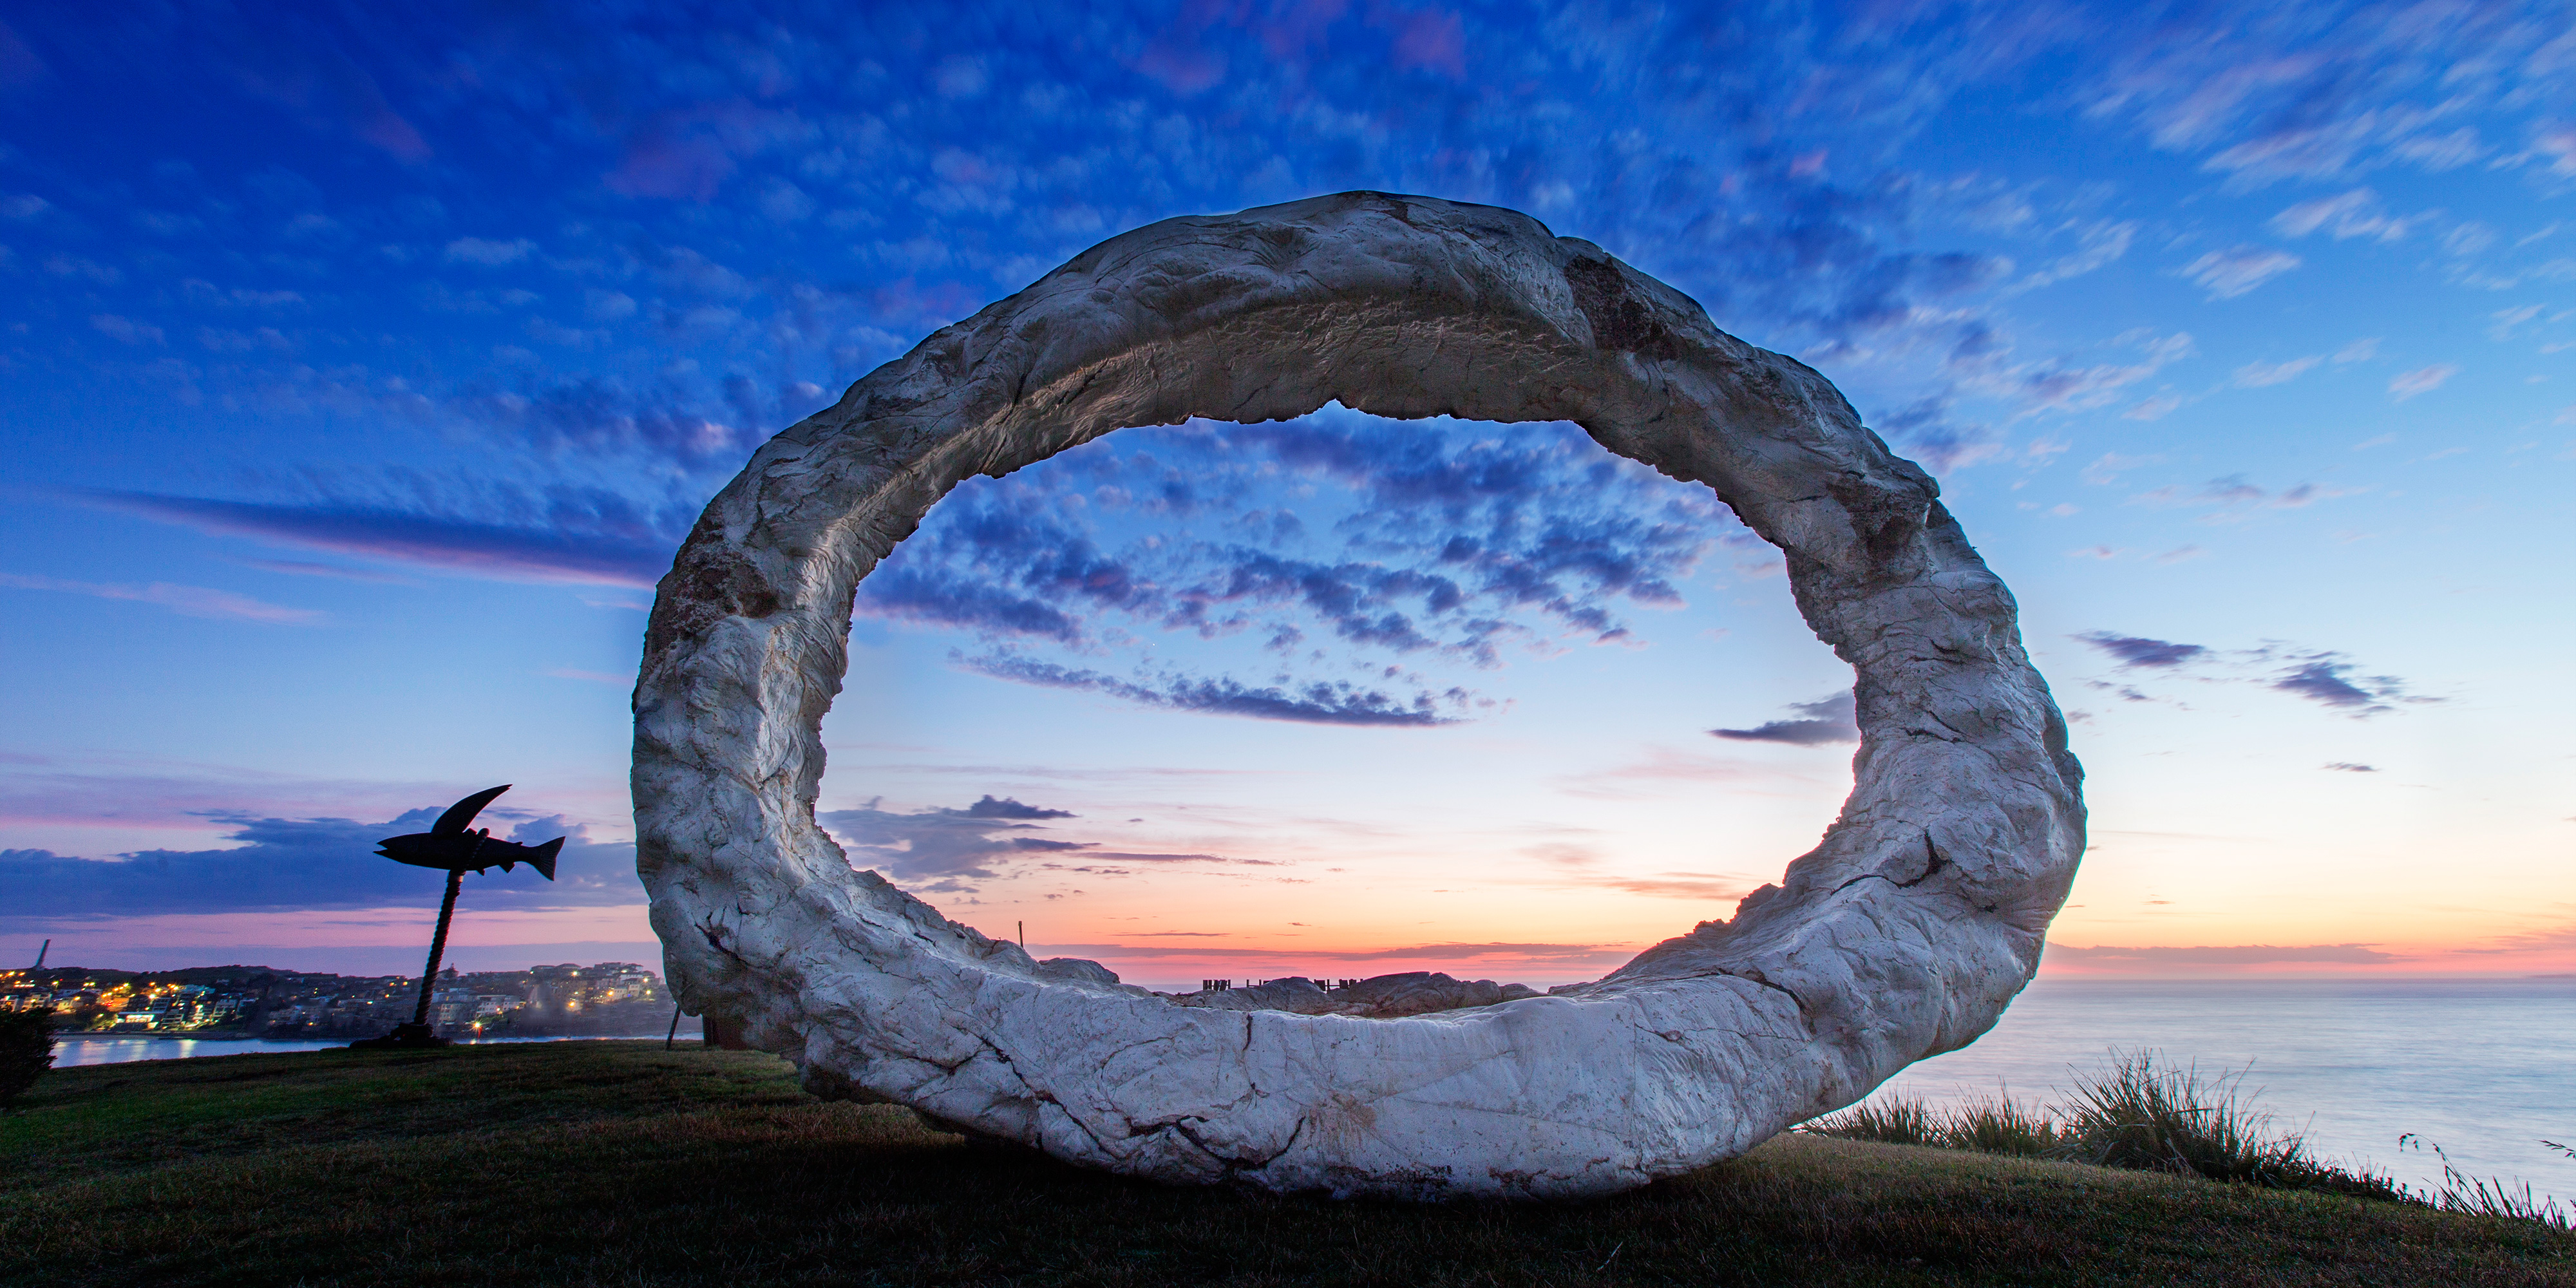 Sculpture by the Sea, Bondi 2015 is now open to the public